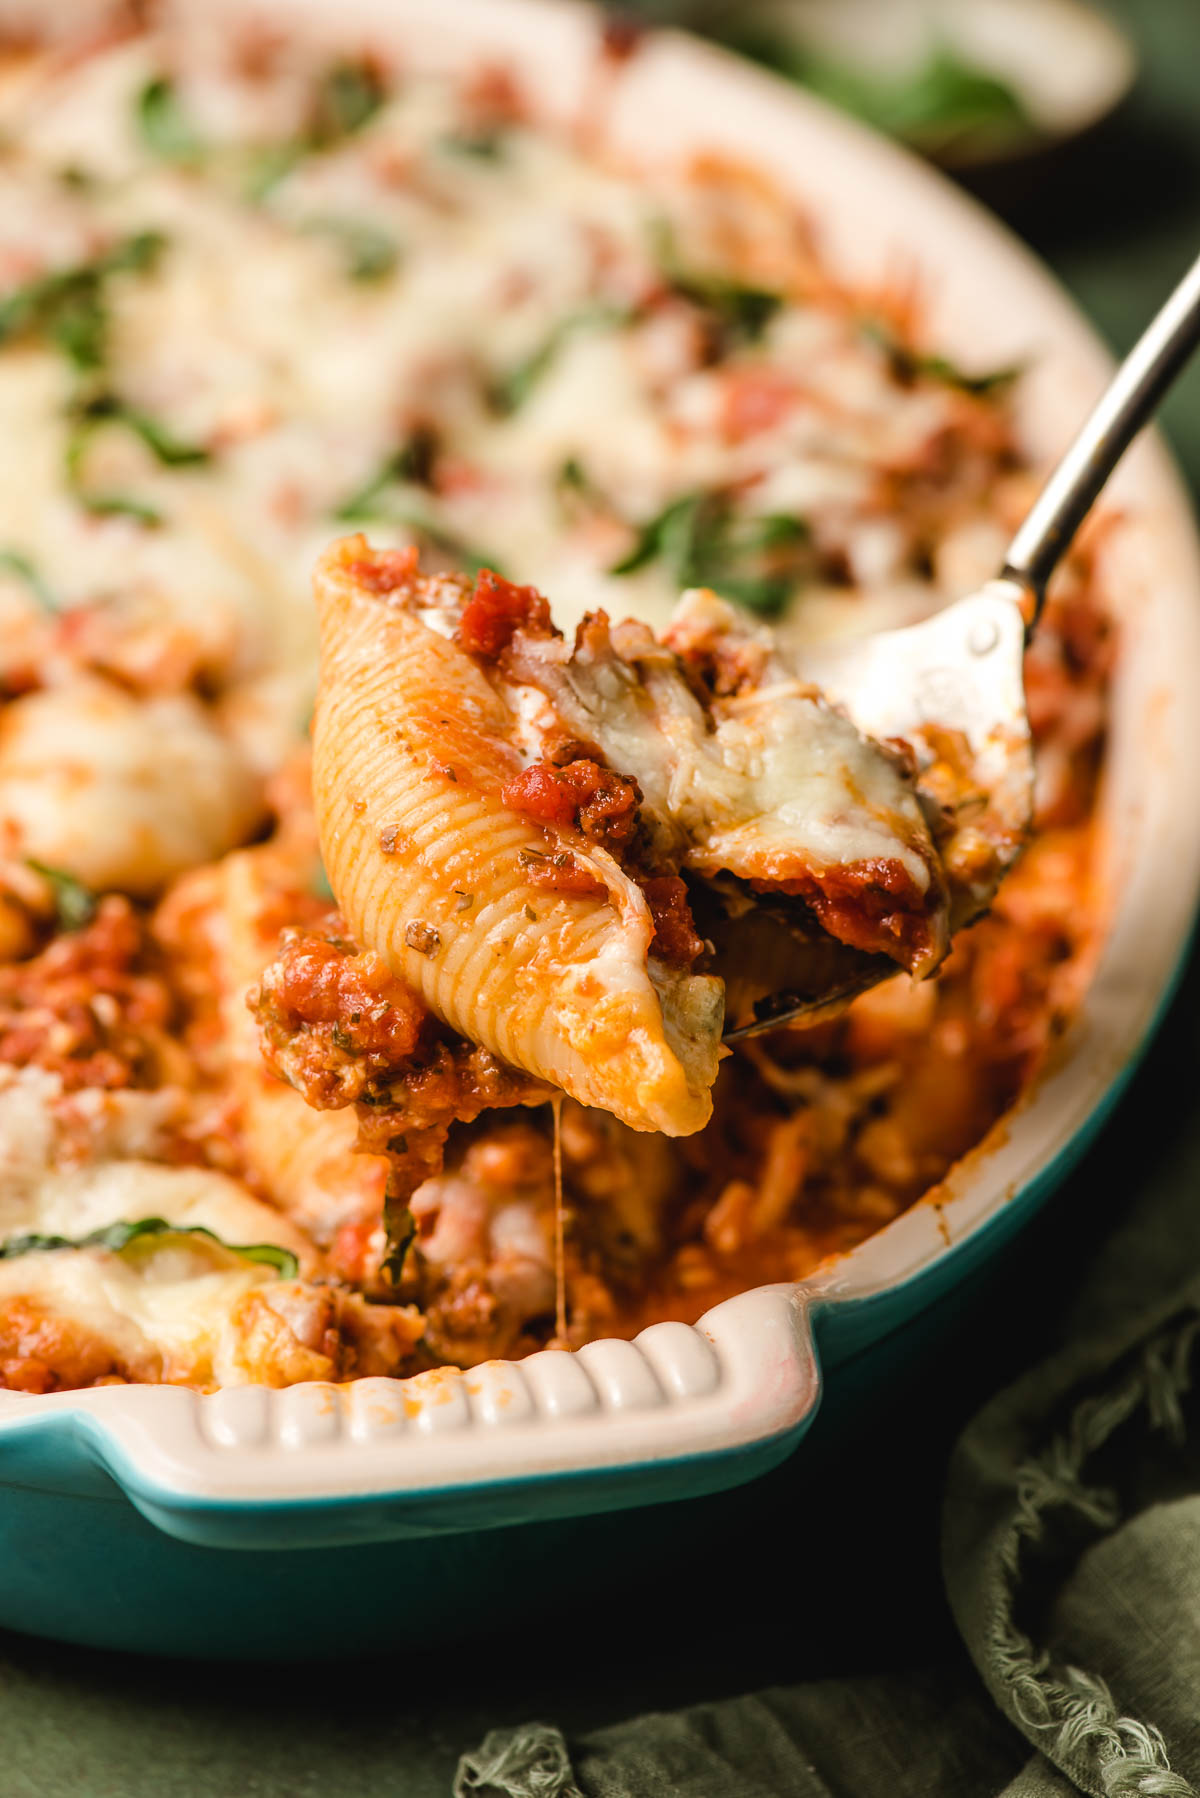 A spoon scoops Cottage Cheese Stuffed Shells from a baking dish.